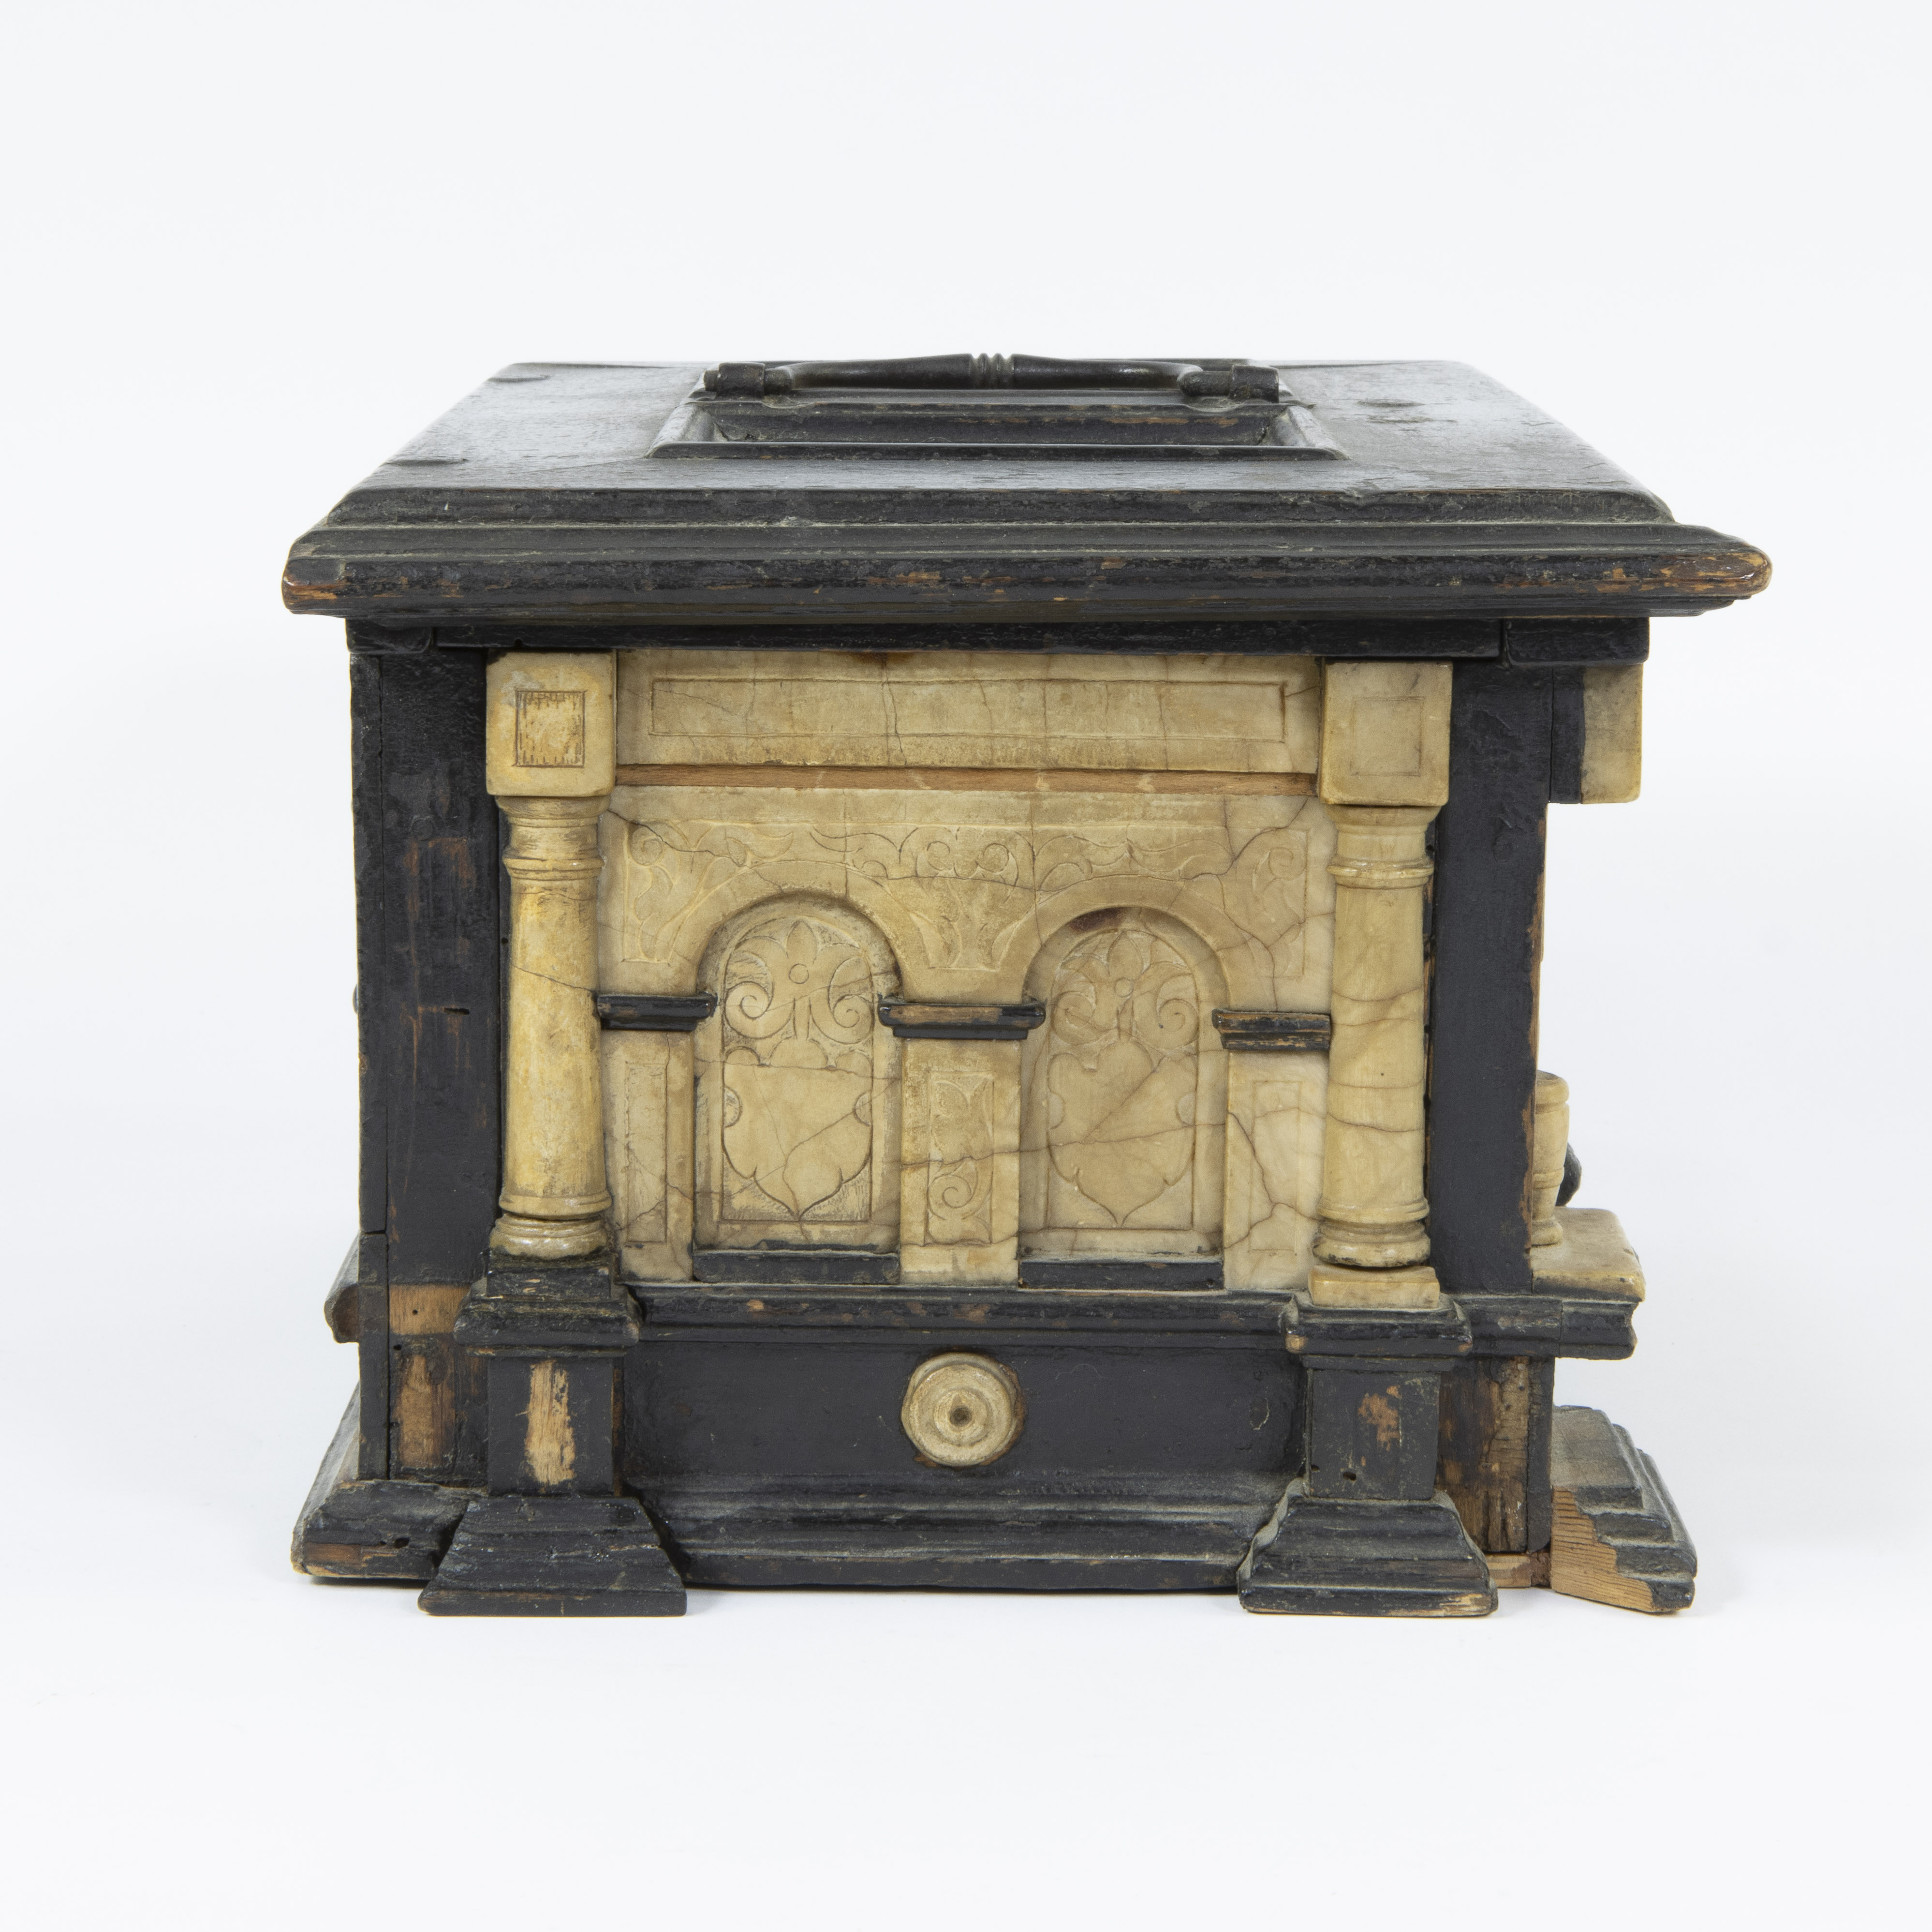 An early 17th century ebonised and alabaster table casket, Malines, circa 1630 - Image 5 of 6